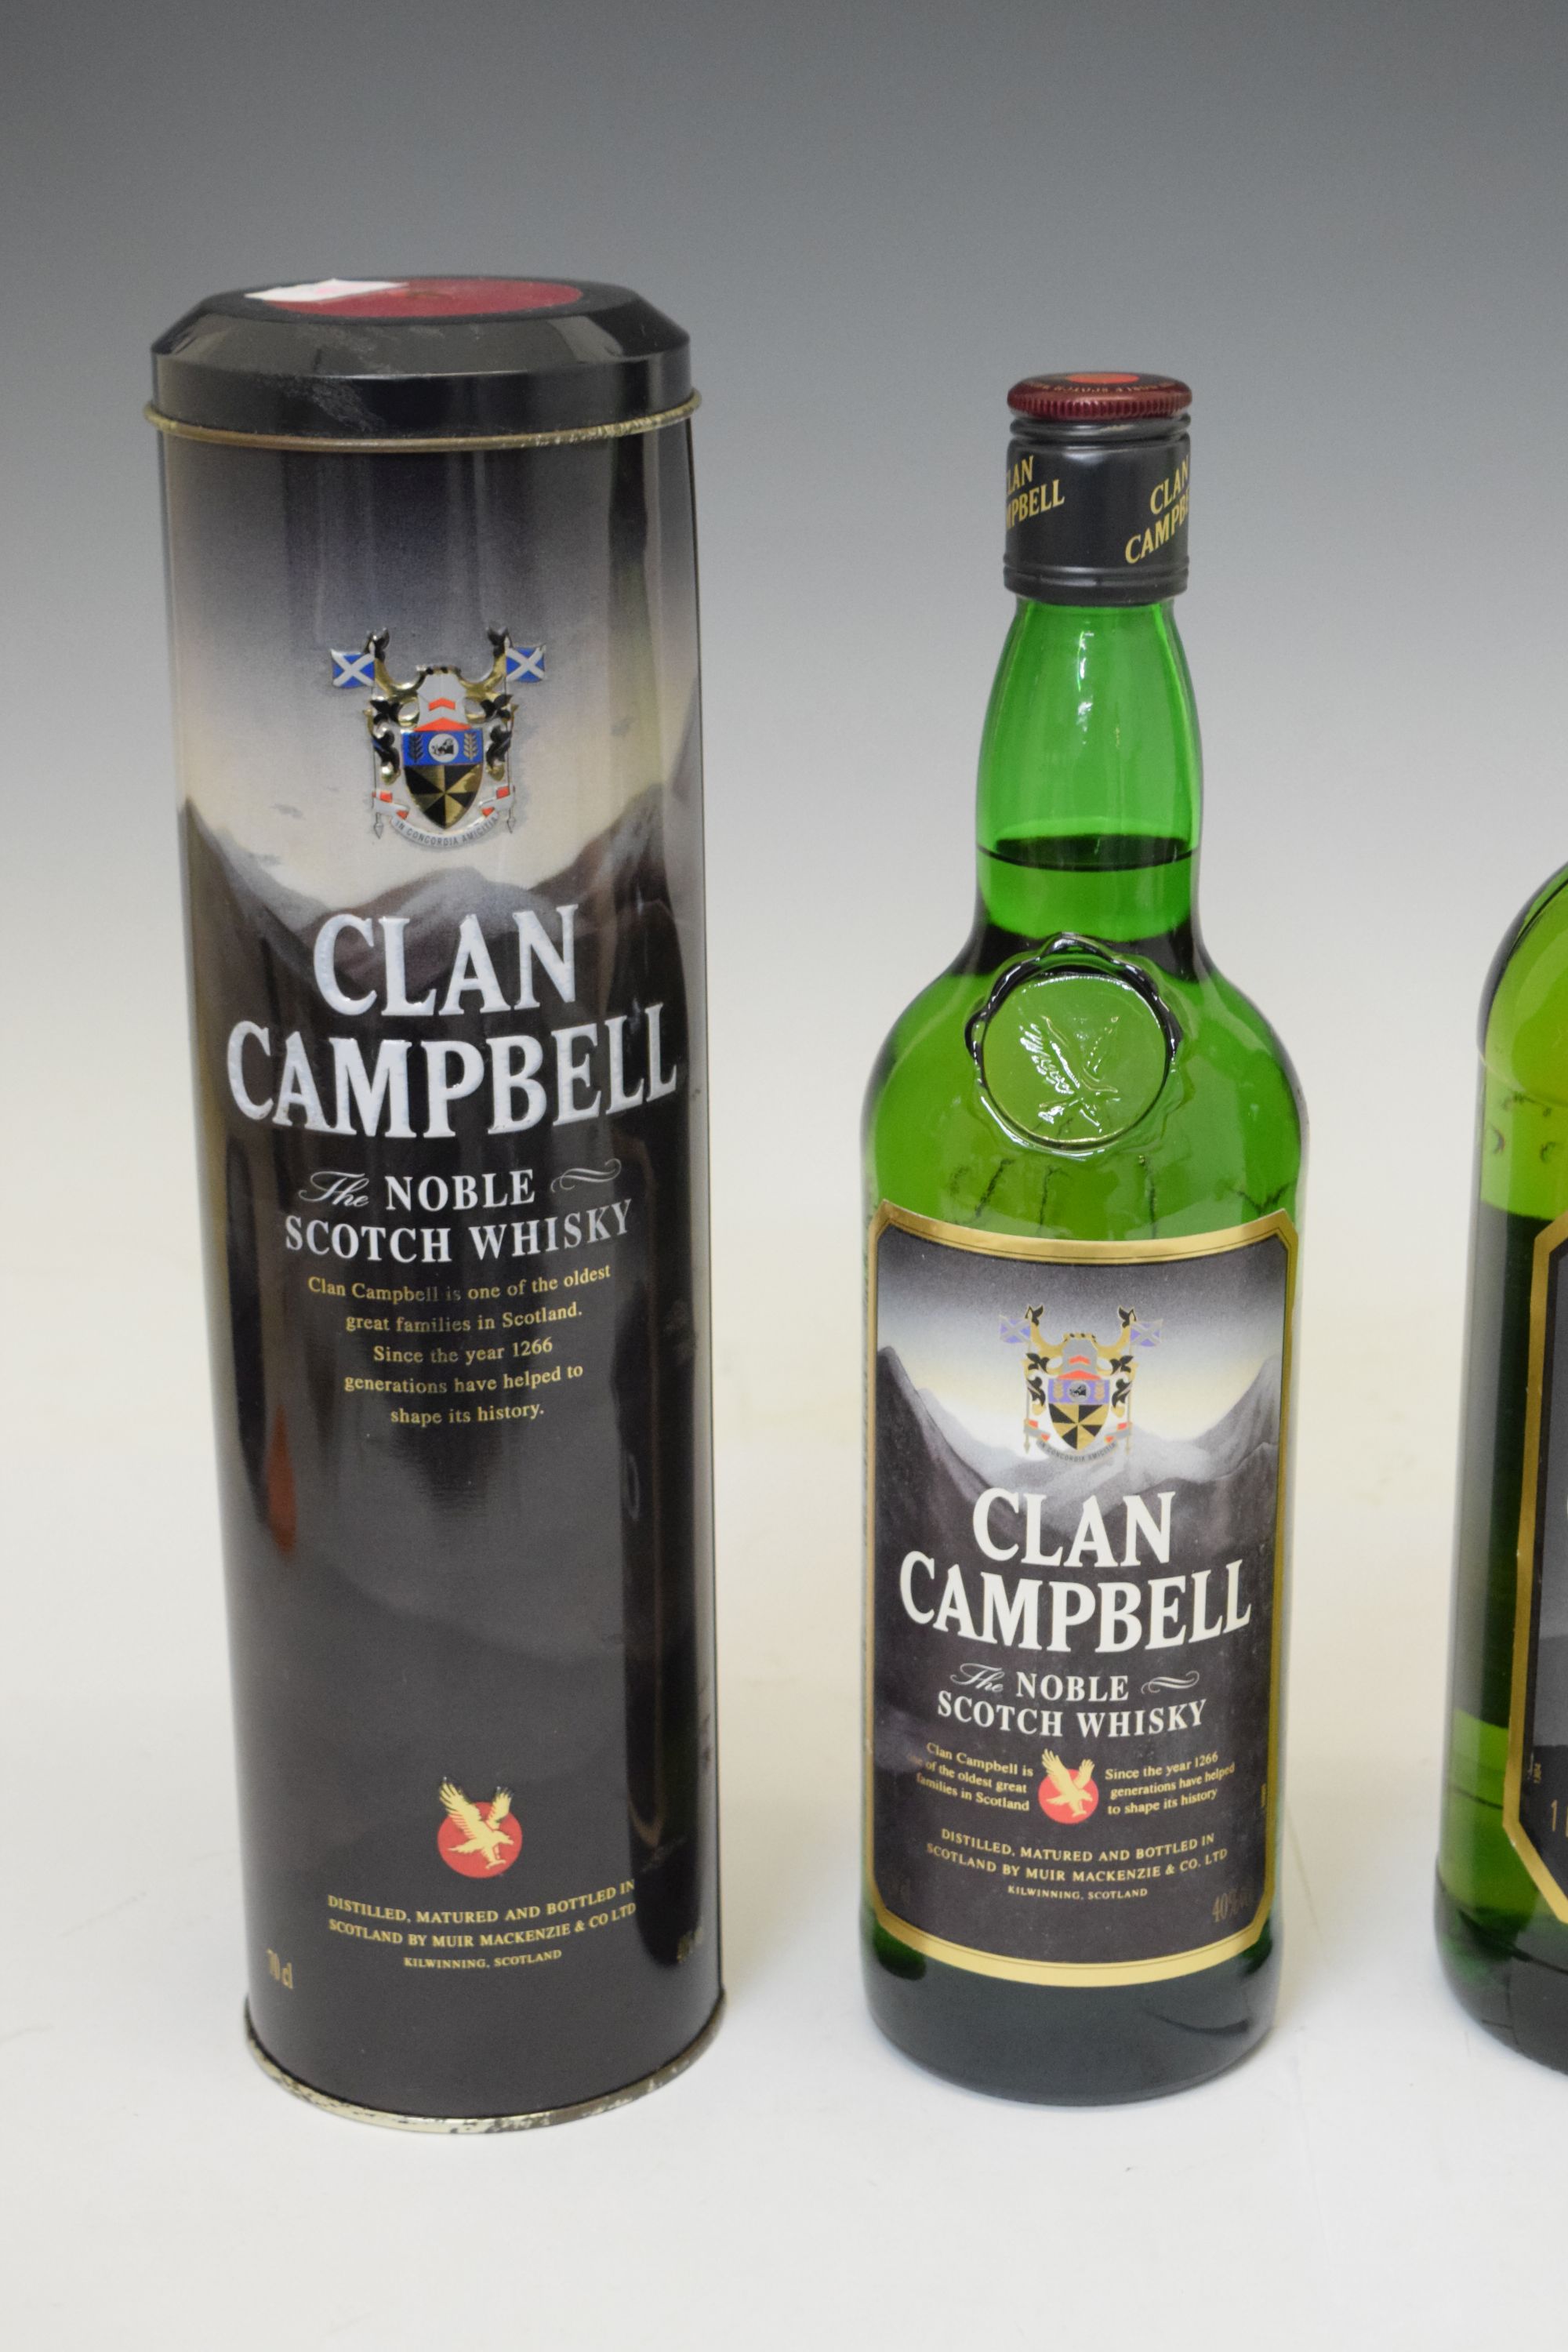 Clan Campbell Blended Scotch Whisky Muir Mackenzie & Co. - buy online